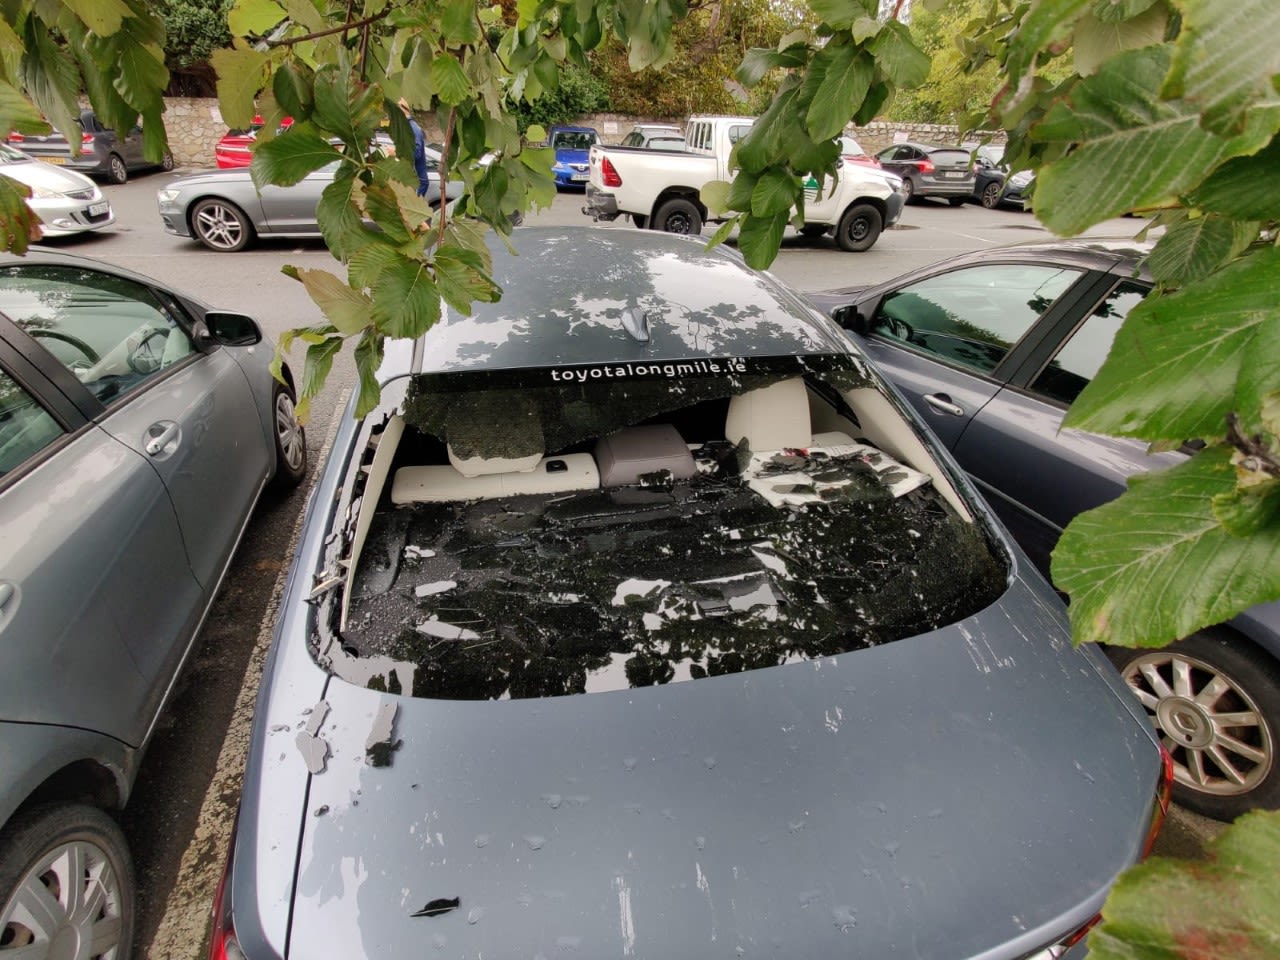 Kevin O'Brien smashed his own windscreen while hitting a six, Leinster Lightning v North-West Warriors, Dublin, August 27, 2020